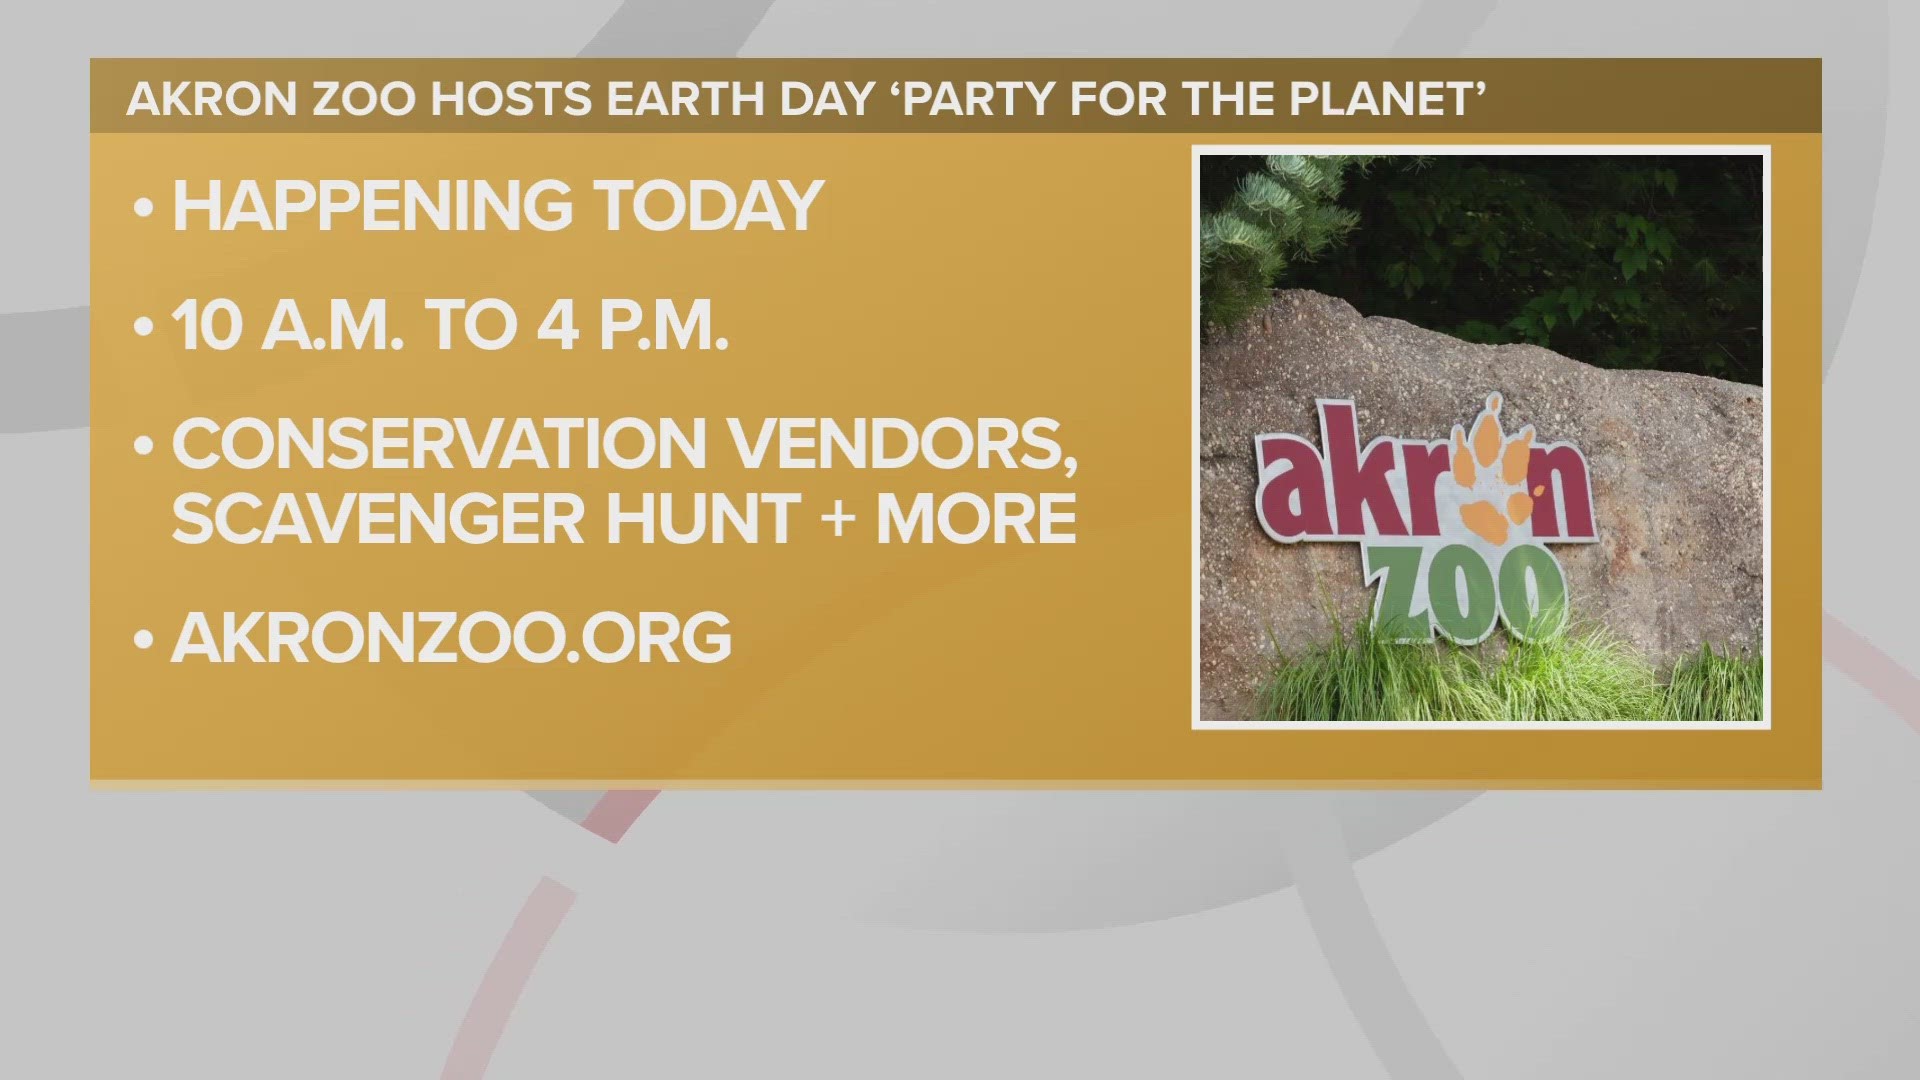 Happy Earth Day 2023! The Akron Zoo is hosting a Party for the Planet for a fun-filled education day.